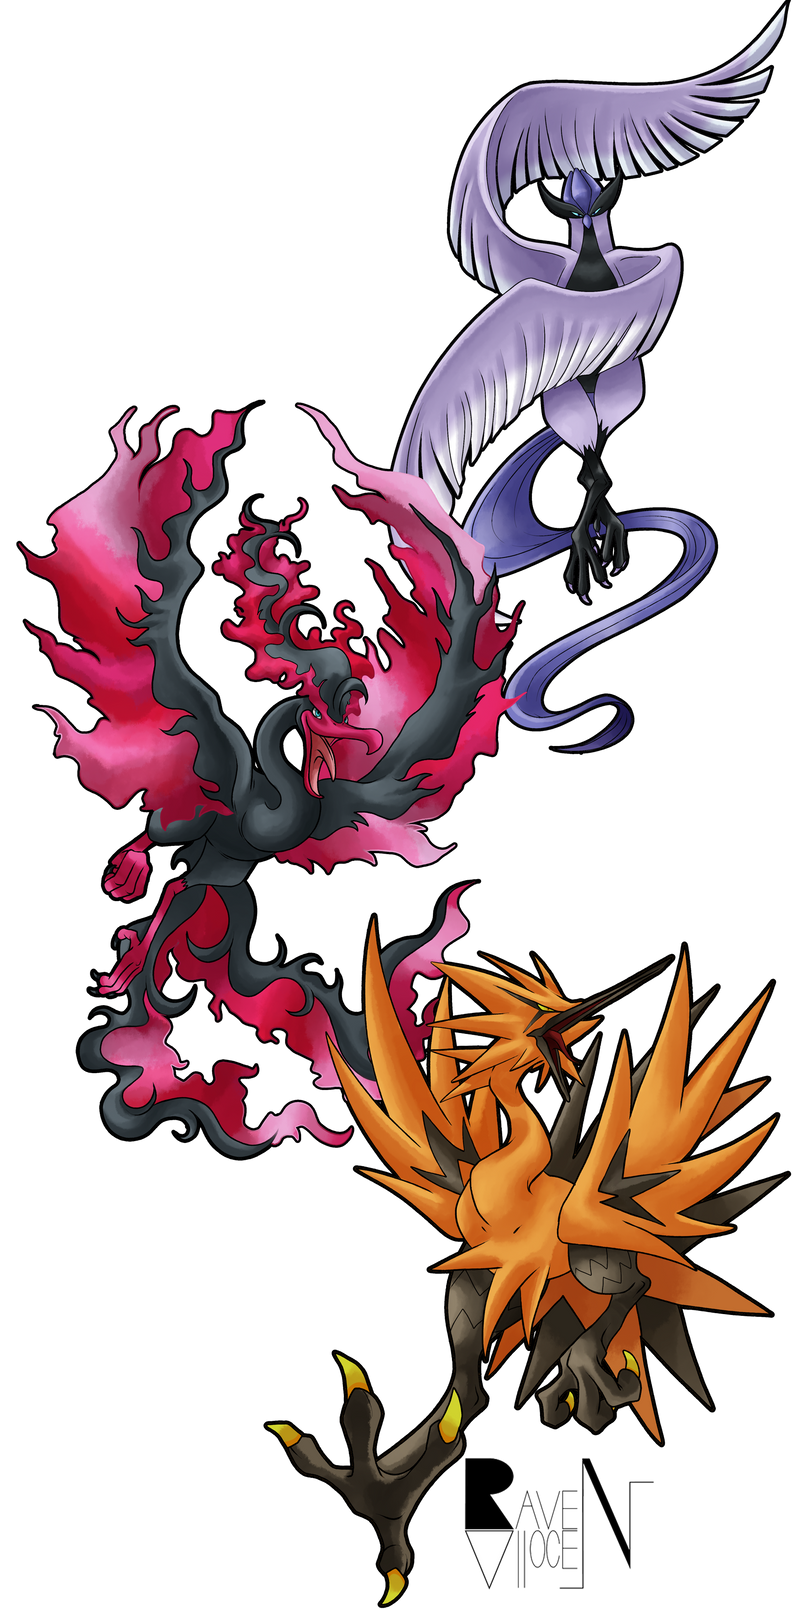 Galarian Articuno, Zapdos, Moltres by Velkss on DeviantArt